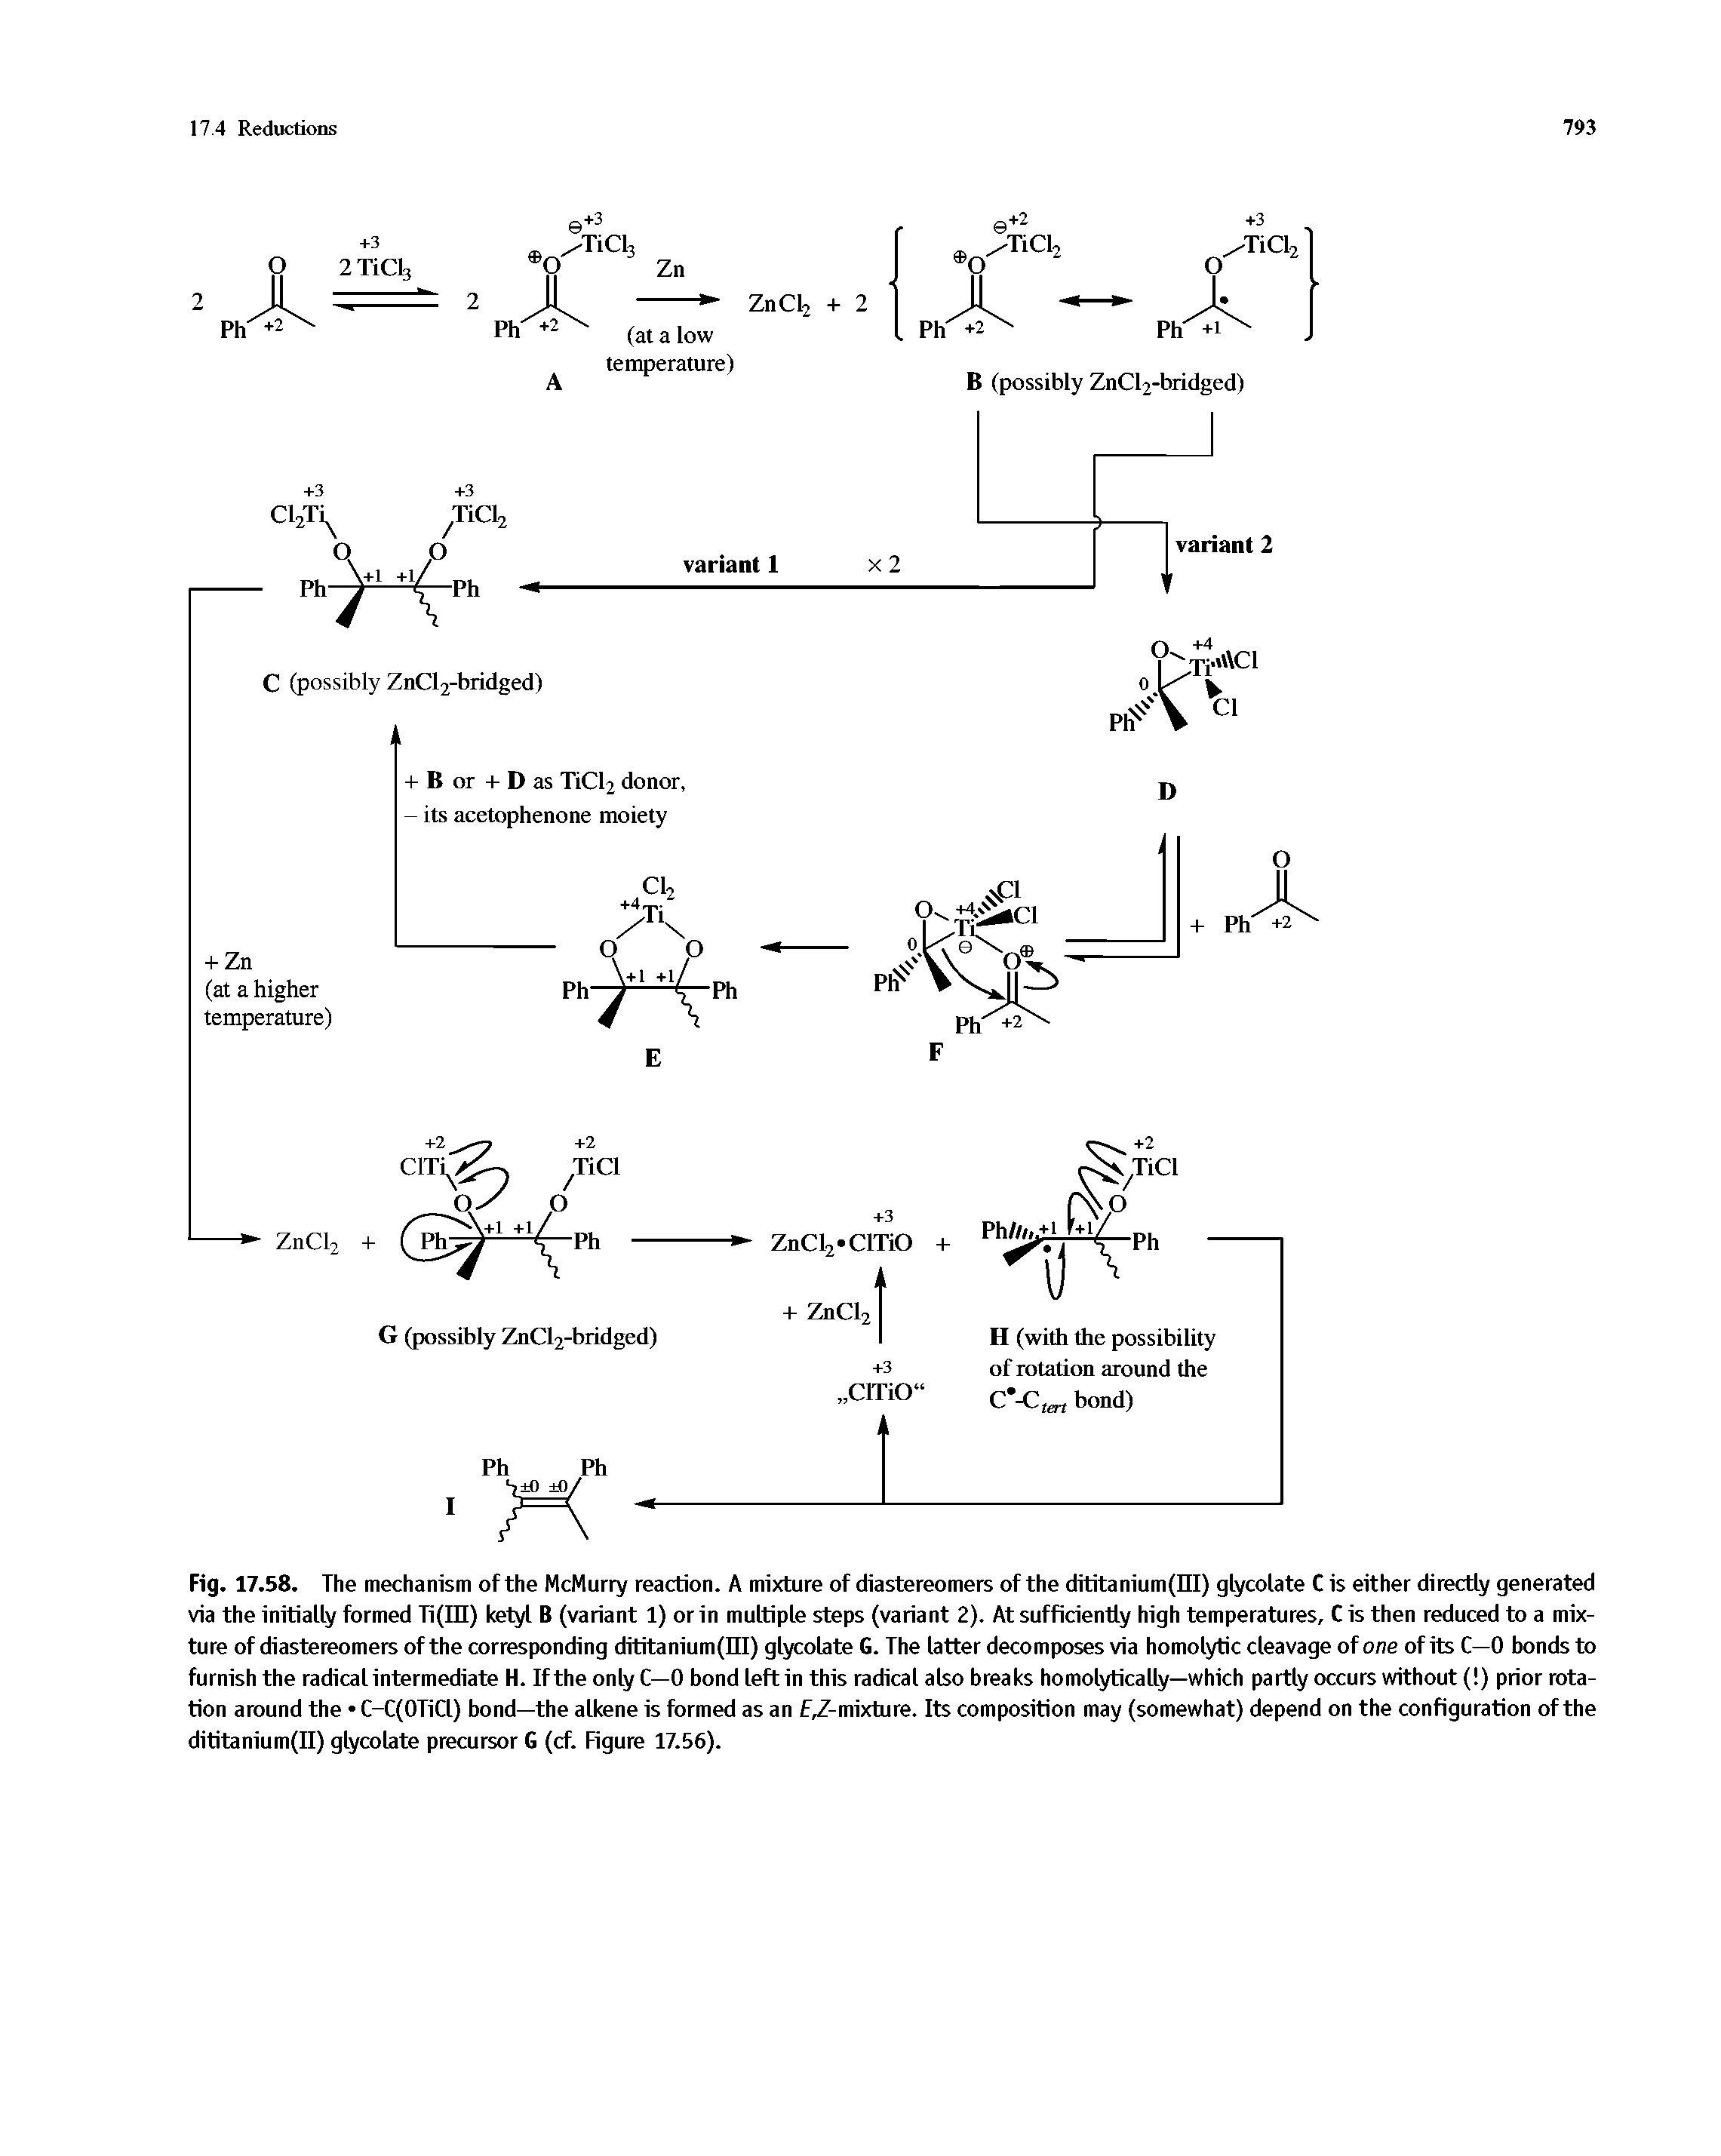 Fig. 17.58. The mechanism of the McMurry reaction. A mixture of diastereomers of the dititanium(III) glycolate C is either directly generated via the initially formed Ti(in) ketyl B (variant 1) or in multiple steps (variant 2). At sufficiently high temperatures, C is then reduced to a mixture of diastereomers of the corresponding dititanium(III) glycolate G. The latter decomposes via homolytic cleavage of one of its C—0 bonds to furnish the radical intermediate H. If the only C—0 bond left in this radical also breaks homolytically—which partly occurs without ( ) prior rotation around the C-C(OTiCl) bond—the alkene is formed as an F,Z-mixture. Its composition may (somewhat) depend on the configuration of the dititanium(II) glycolate precursor G (cf. Figure 17.56).